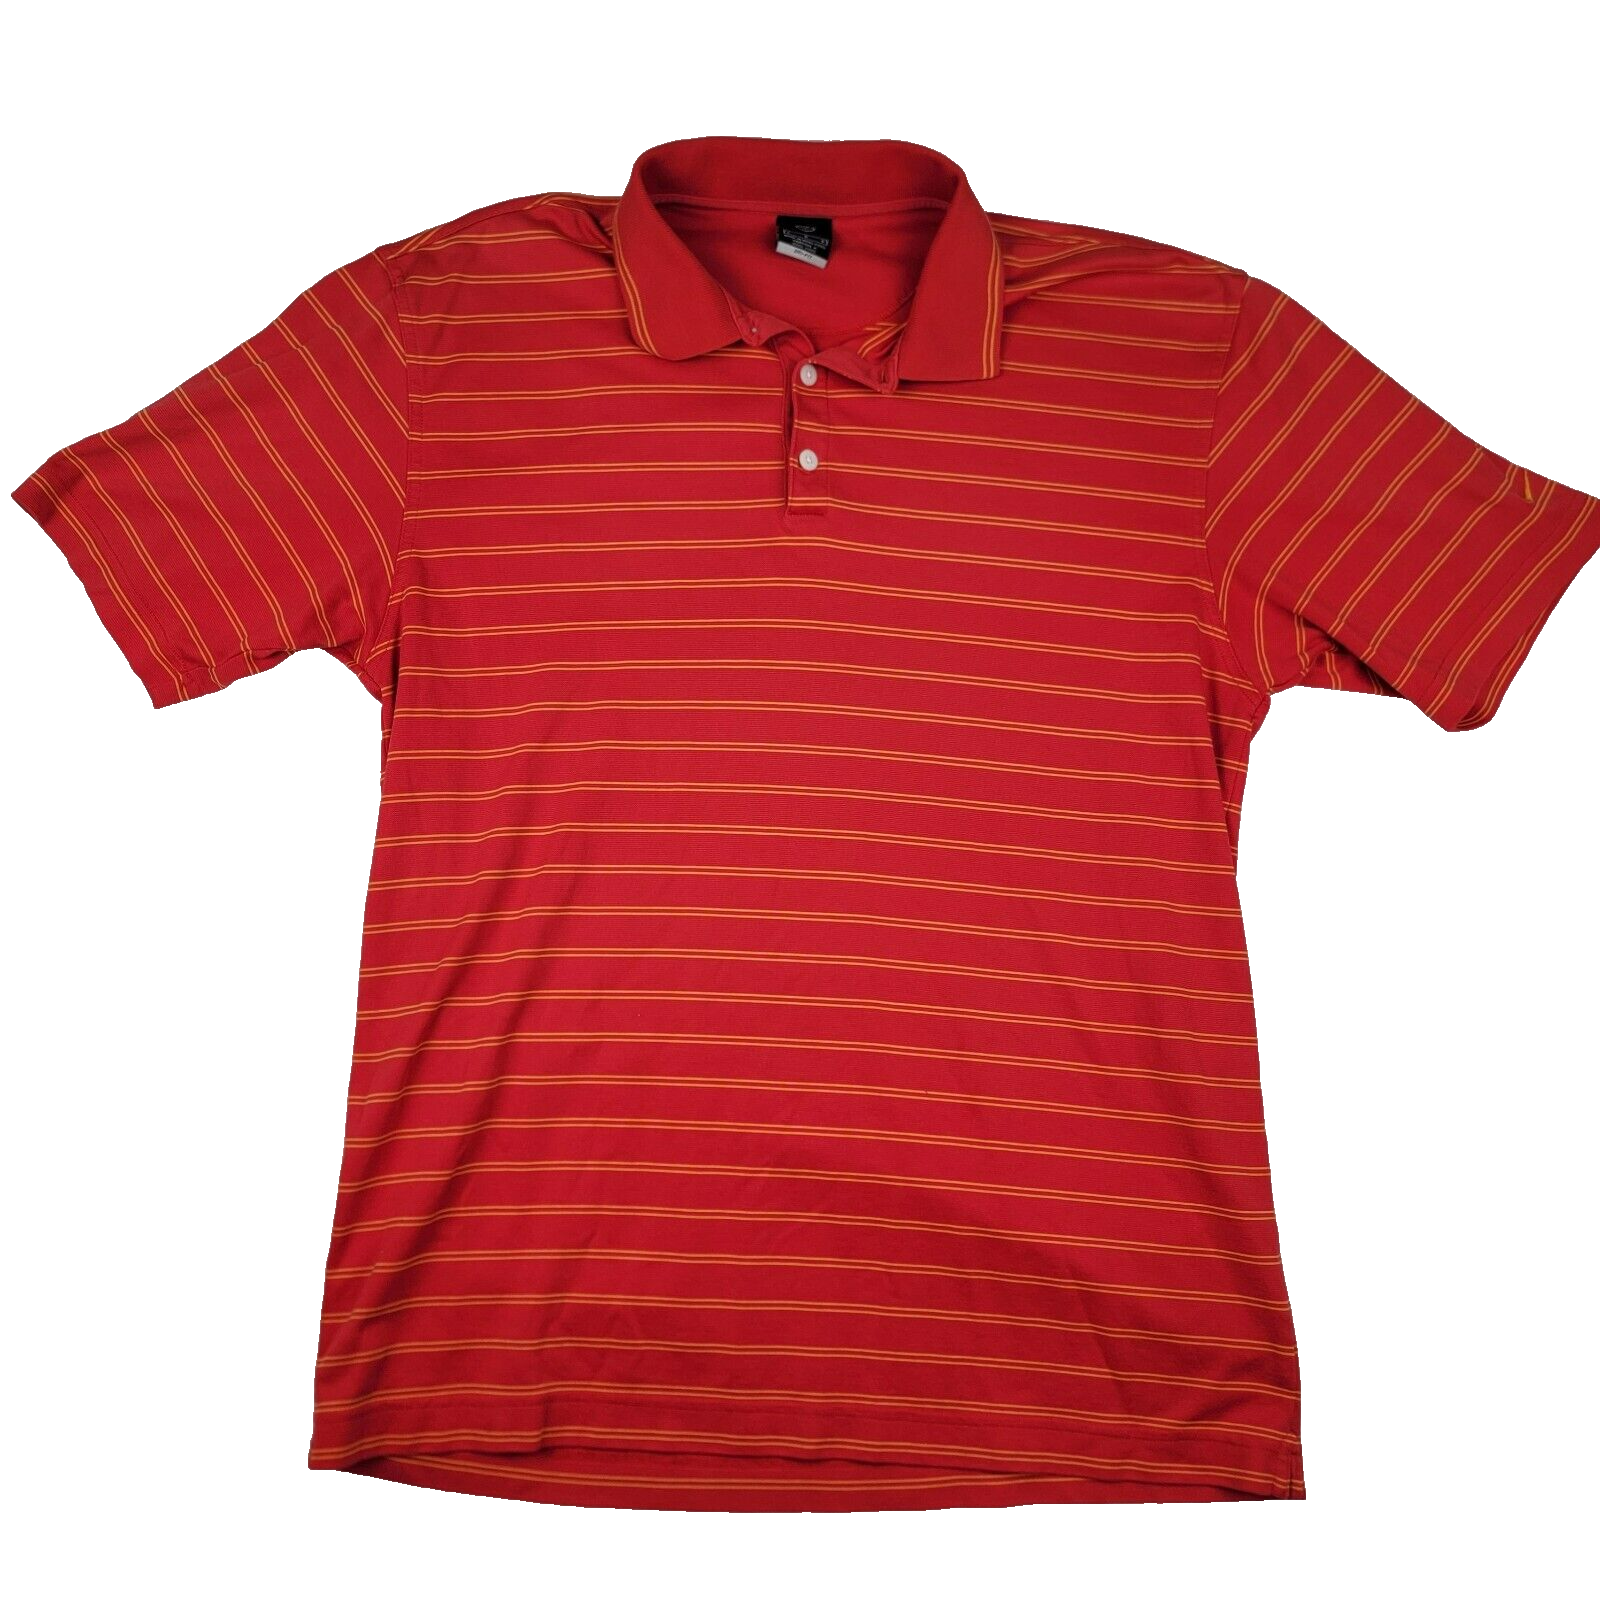 Primary image for Nike Golf Dri Fit Performance Polo Men's Large Red Yellow Striped